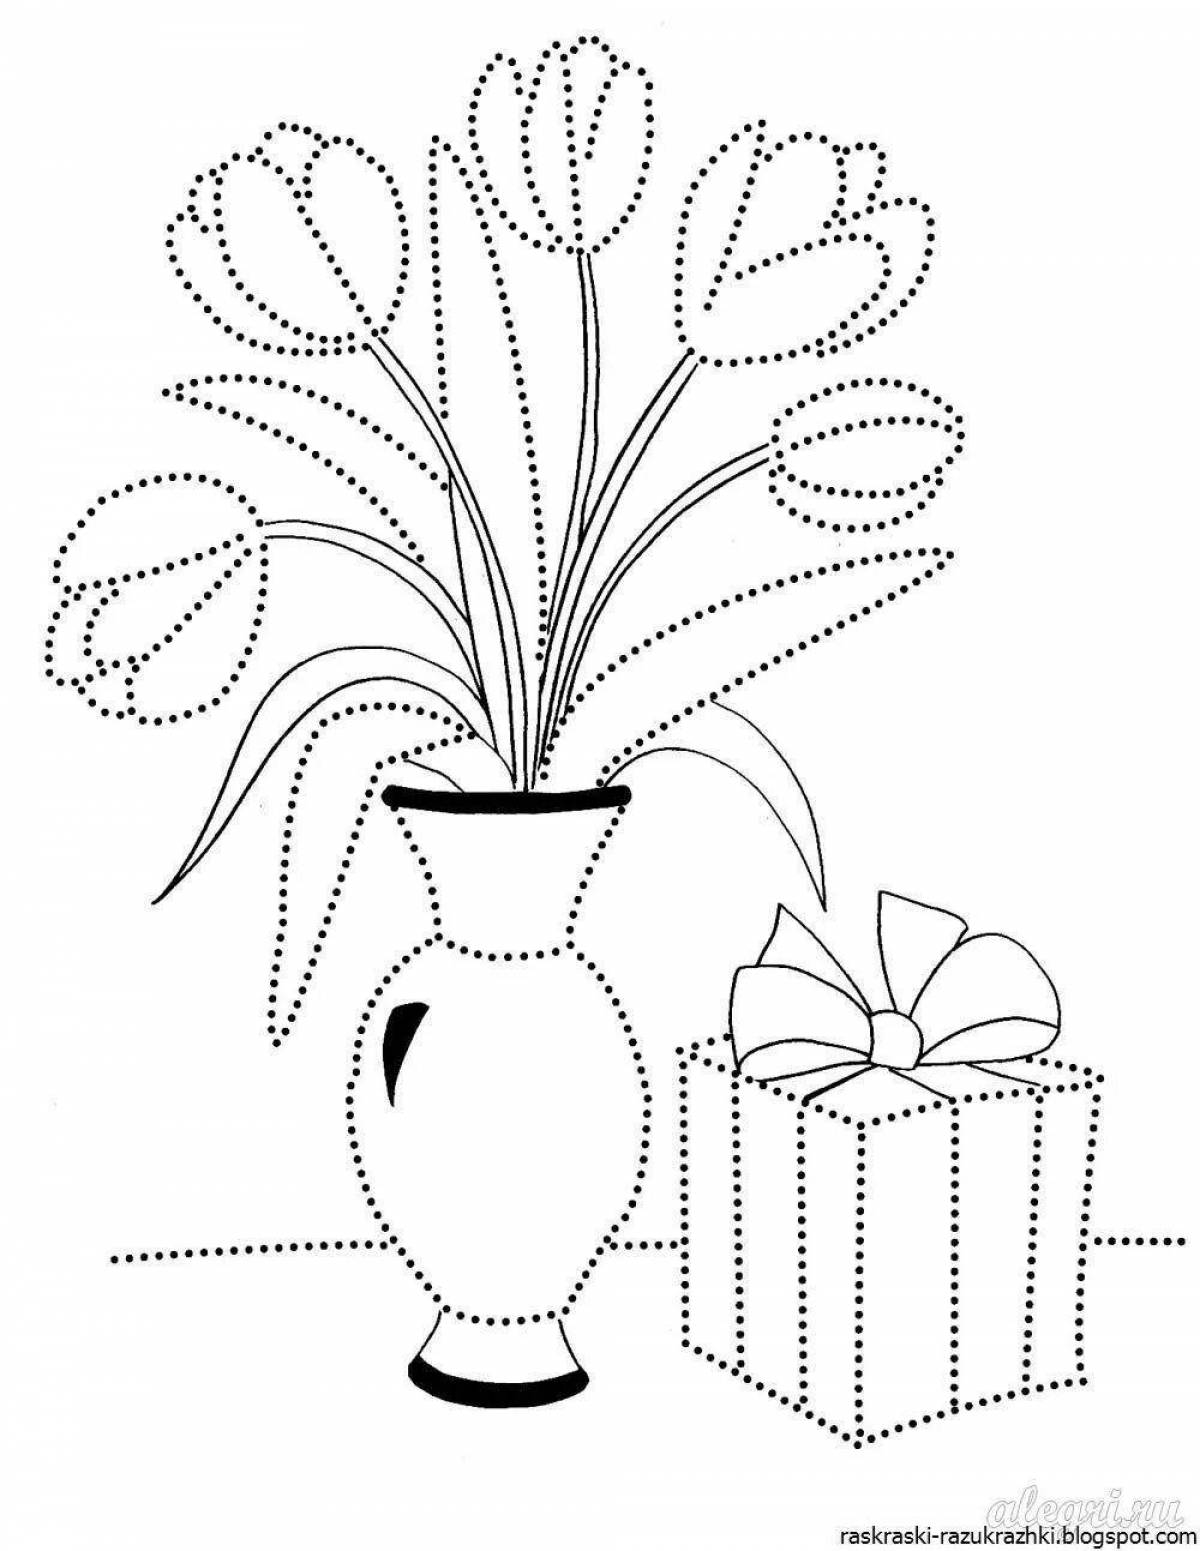 Delightful coloring flowers in a vase for the little ones